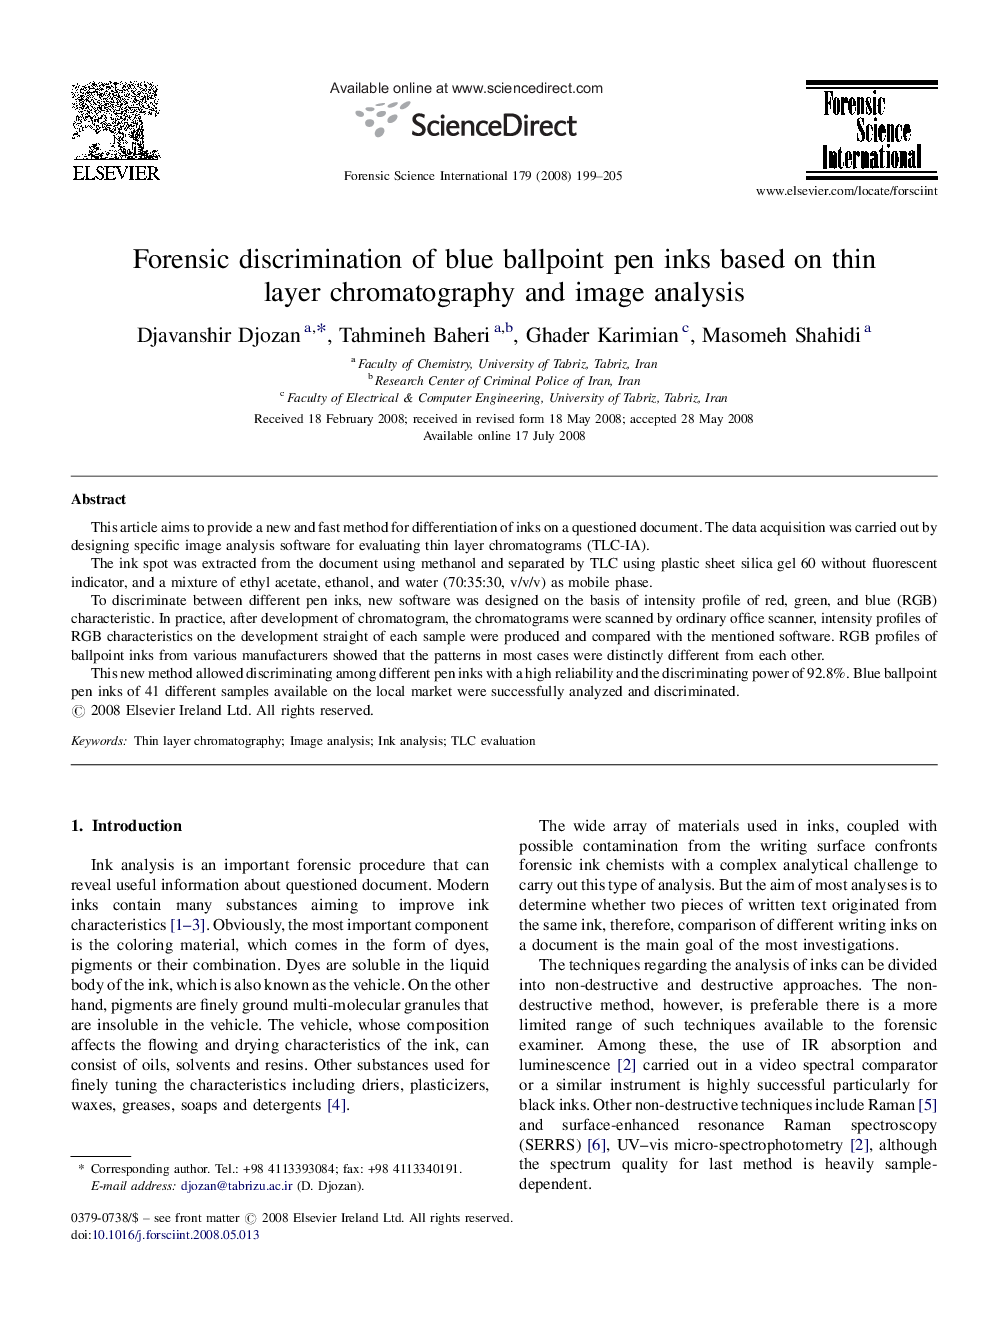 Forensic discrimination of blue ballpoint pen inks based on thin layer chromatography and image analysis